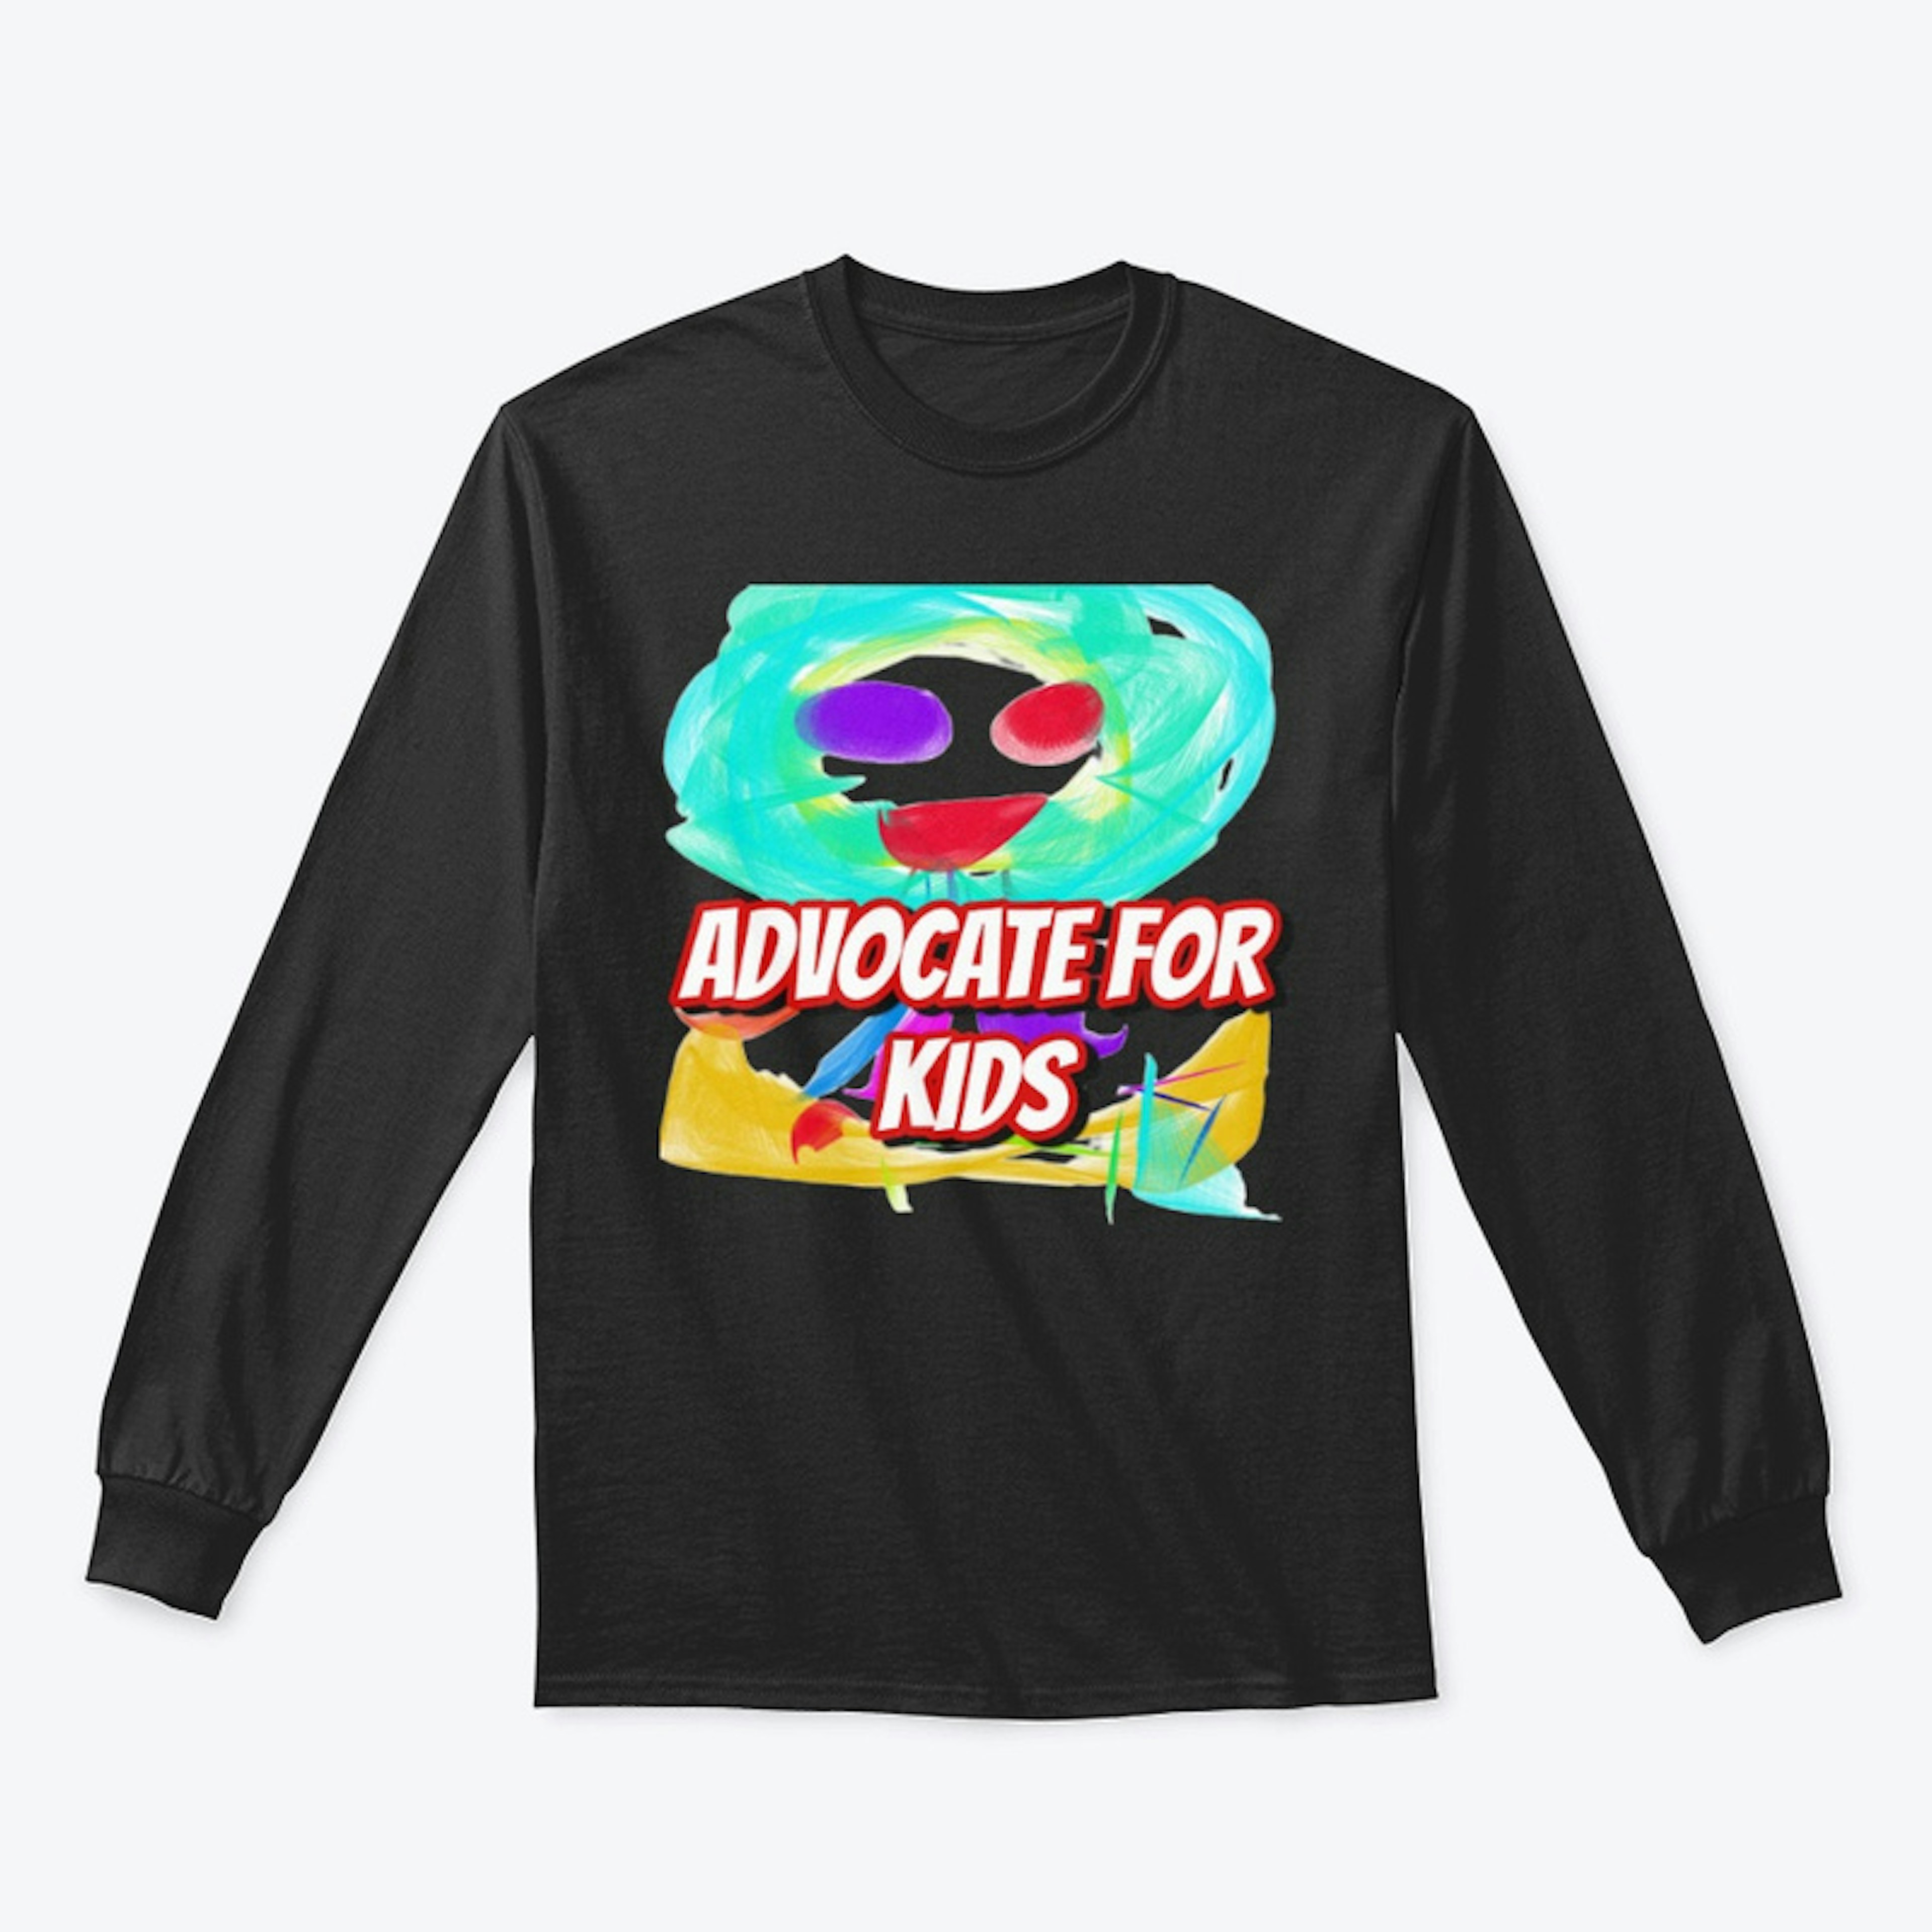 ADVOCATE FOR KIDS!